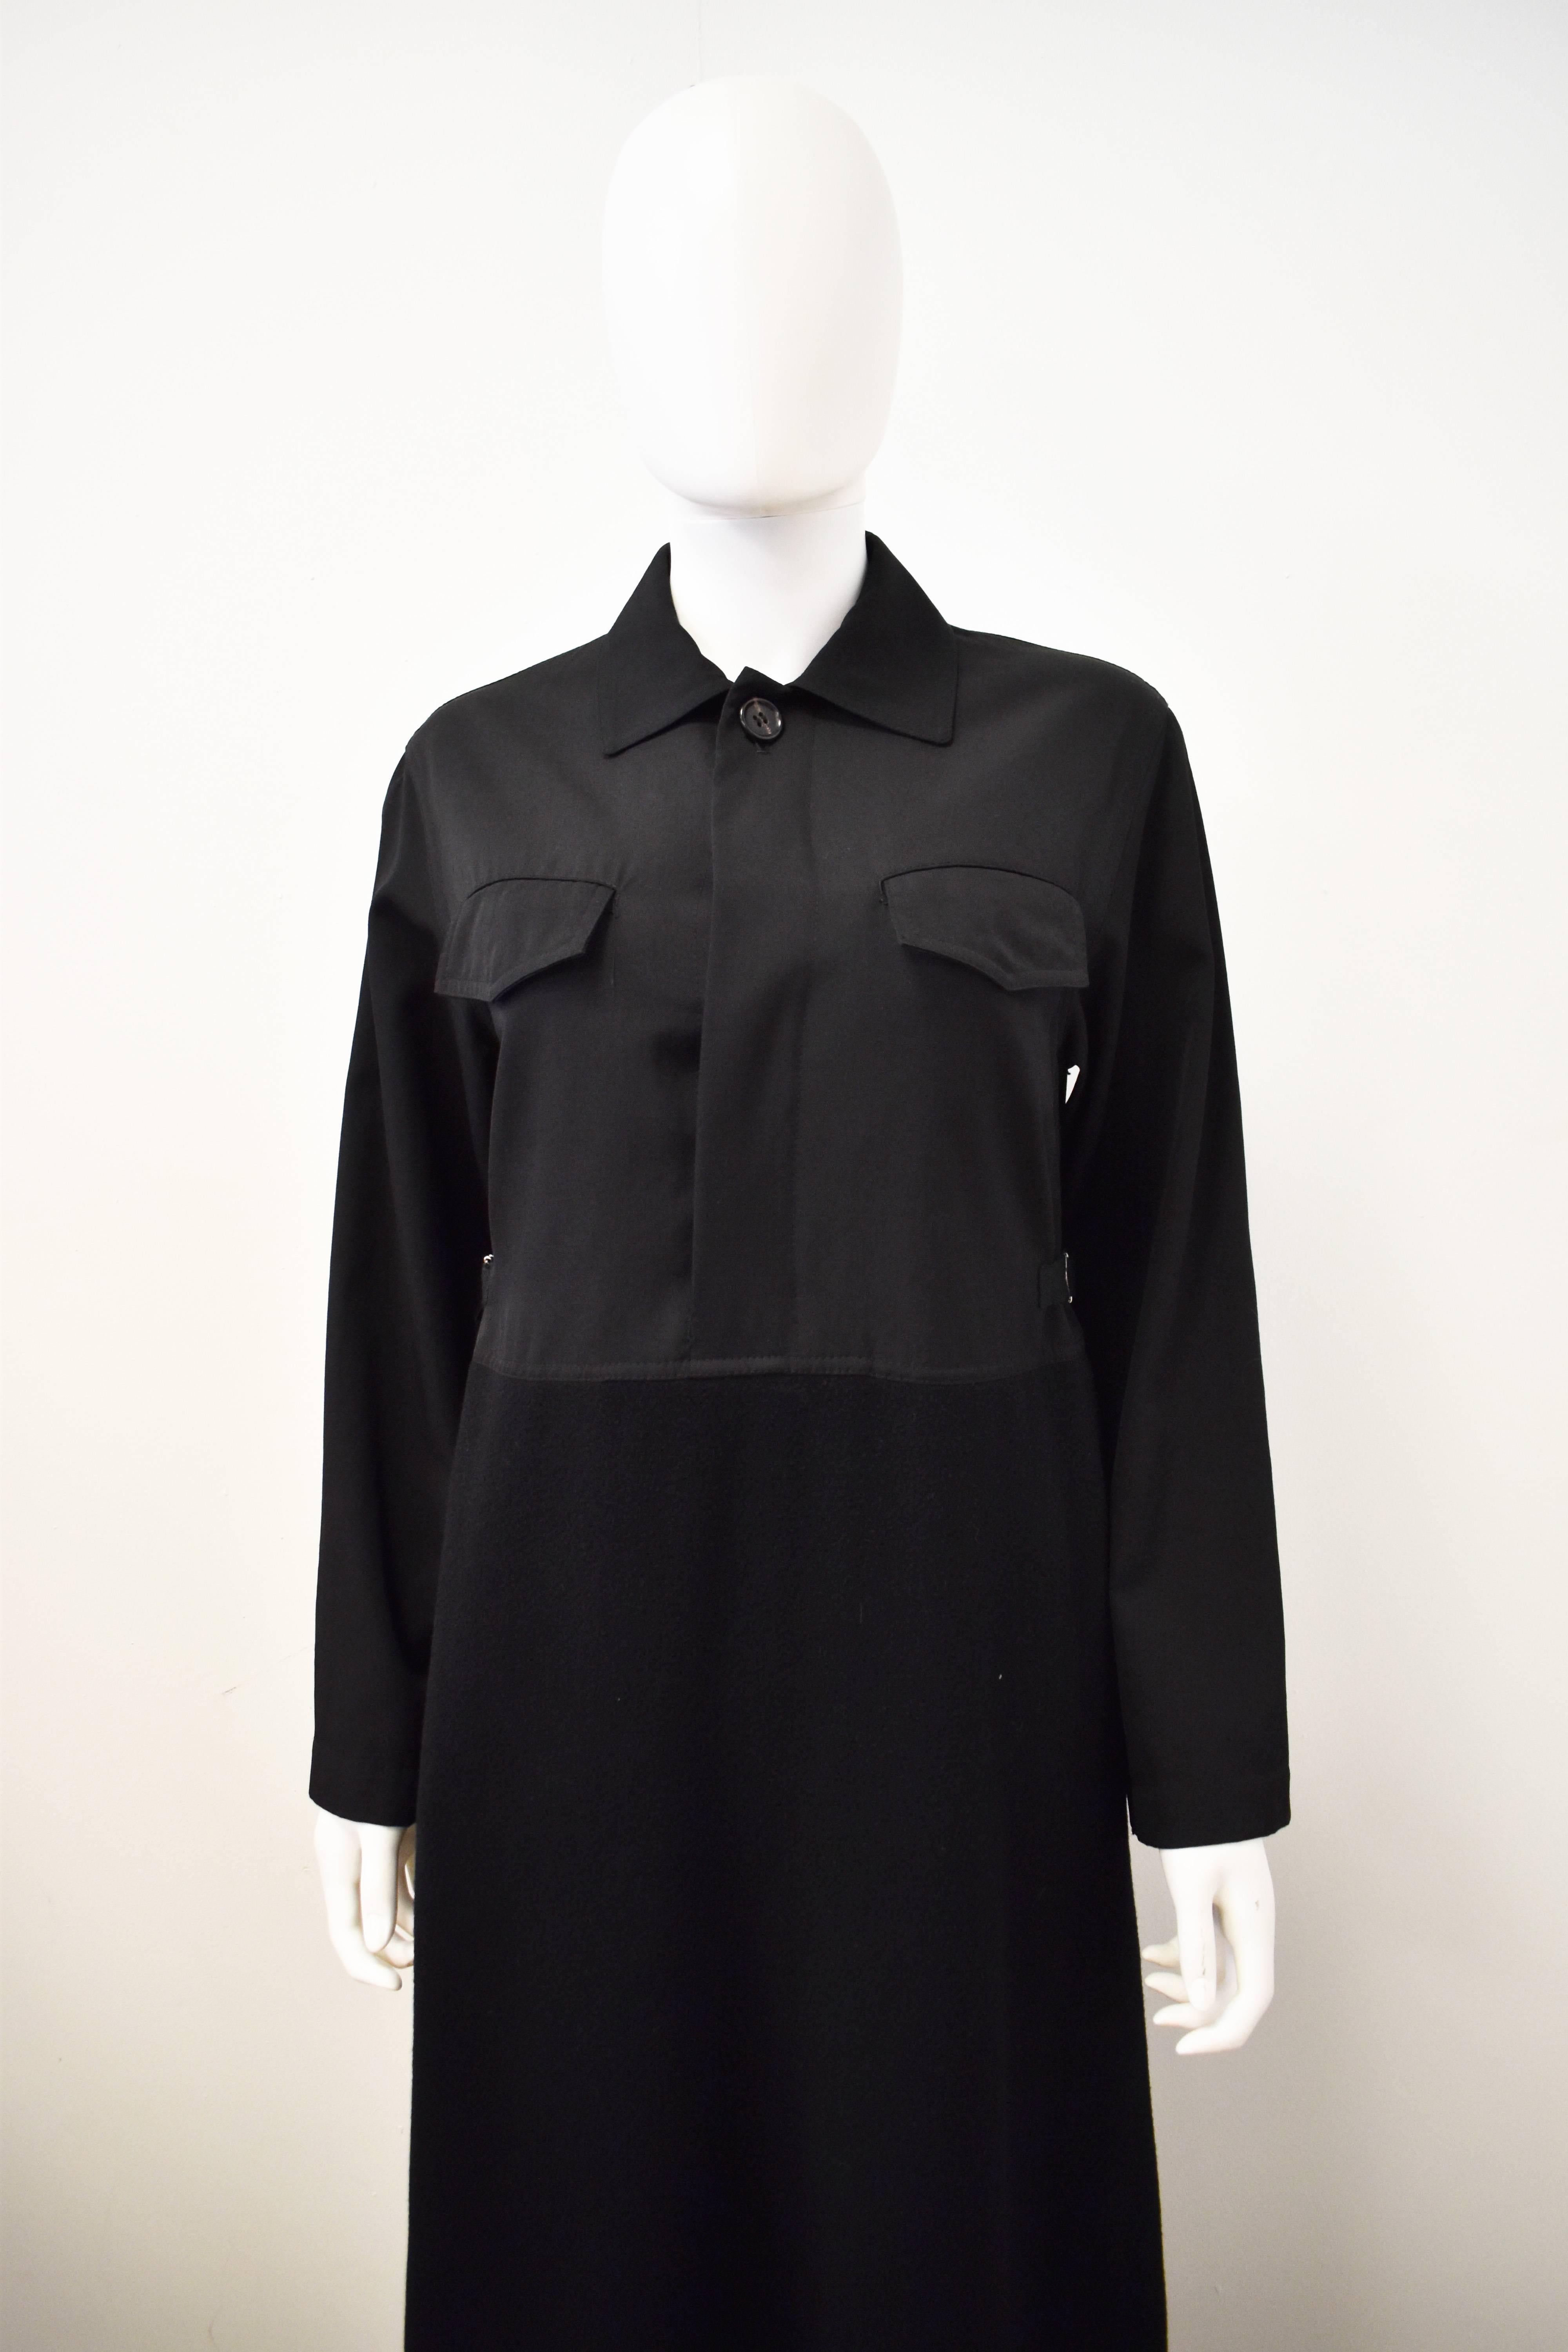 Comme des Garcons Black Tricot Dress with Long Sleeves and Chest Pockets 1994 1